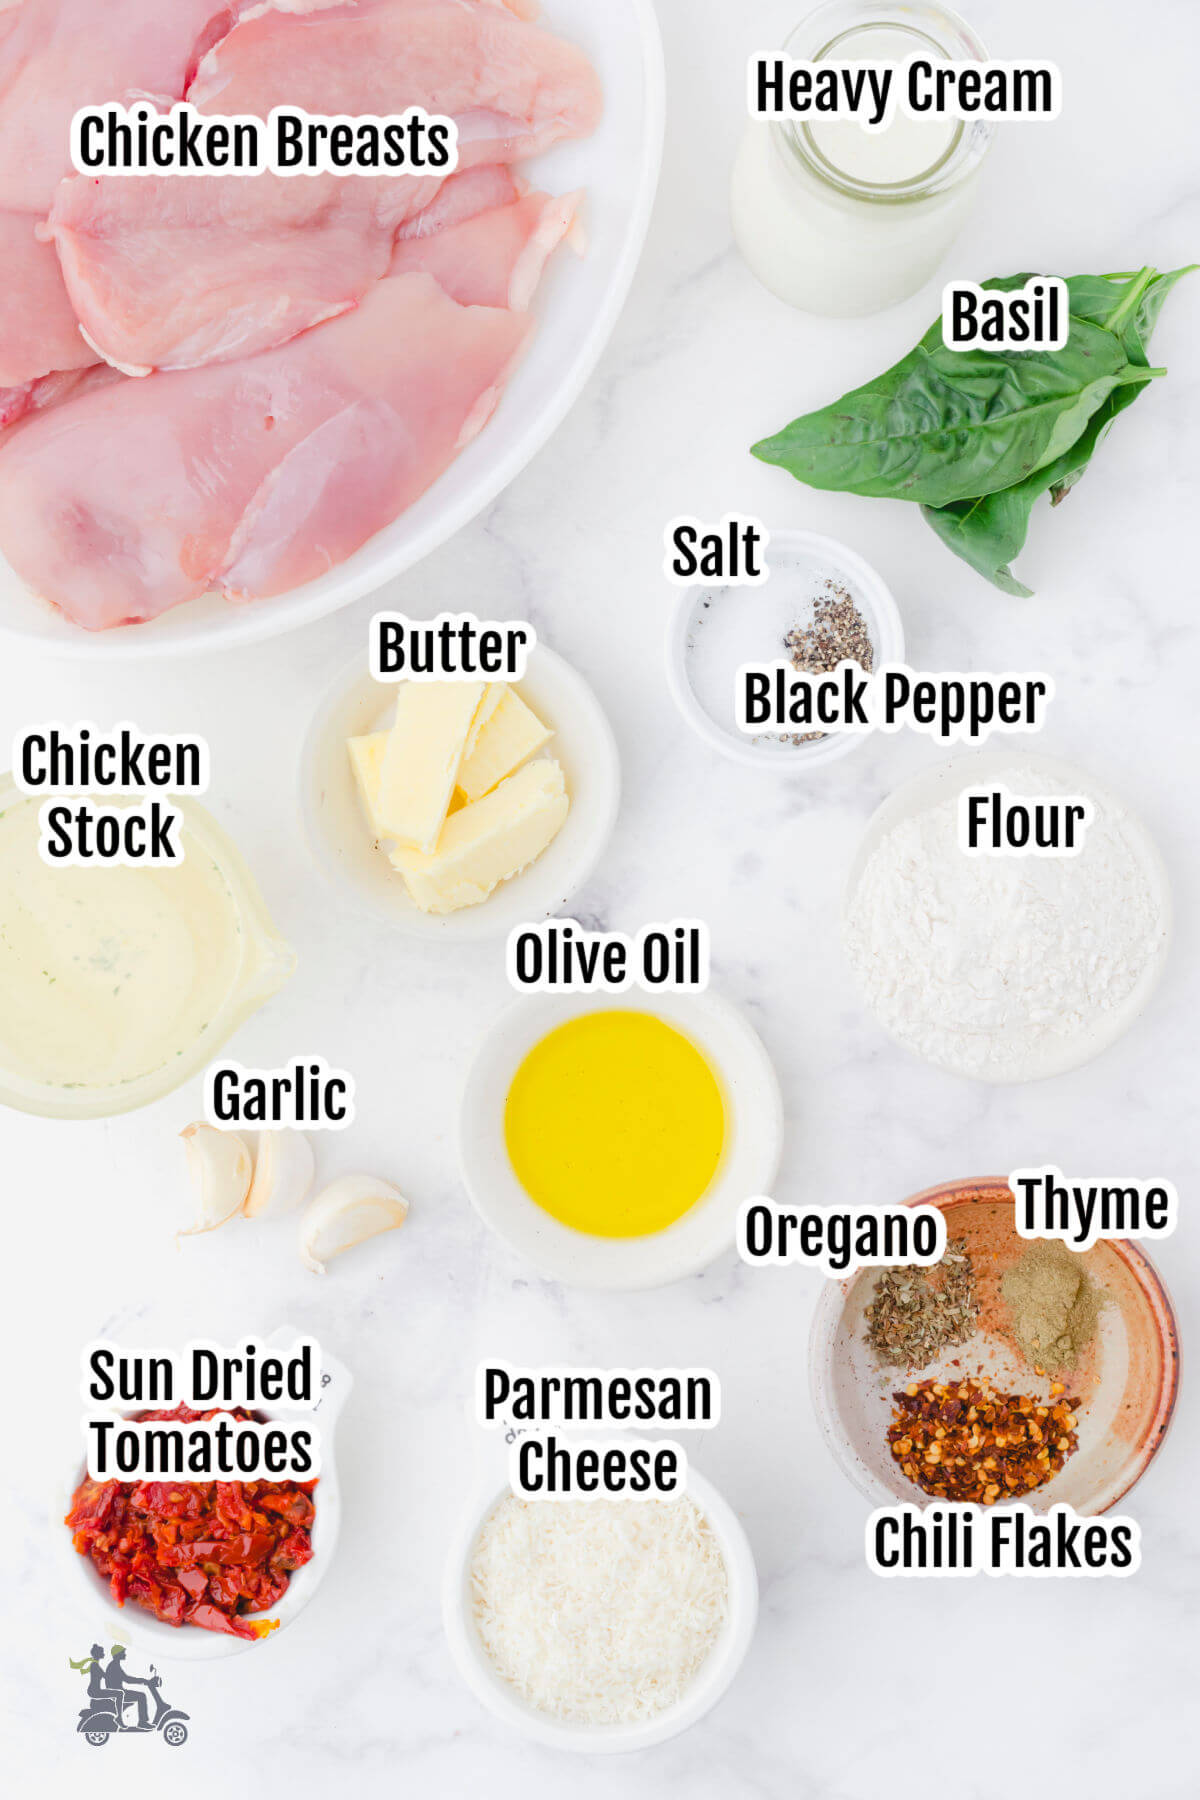 Image of the ingredients necessary to make Marry Me Chicken.